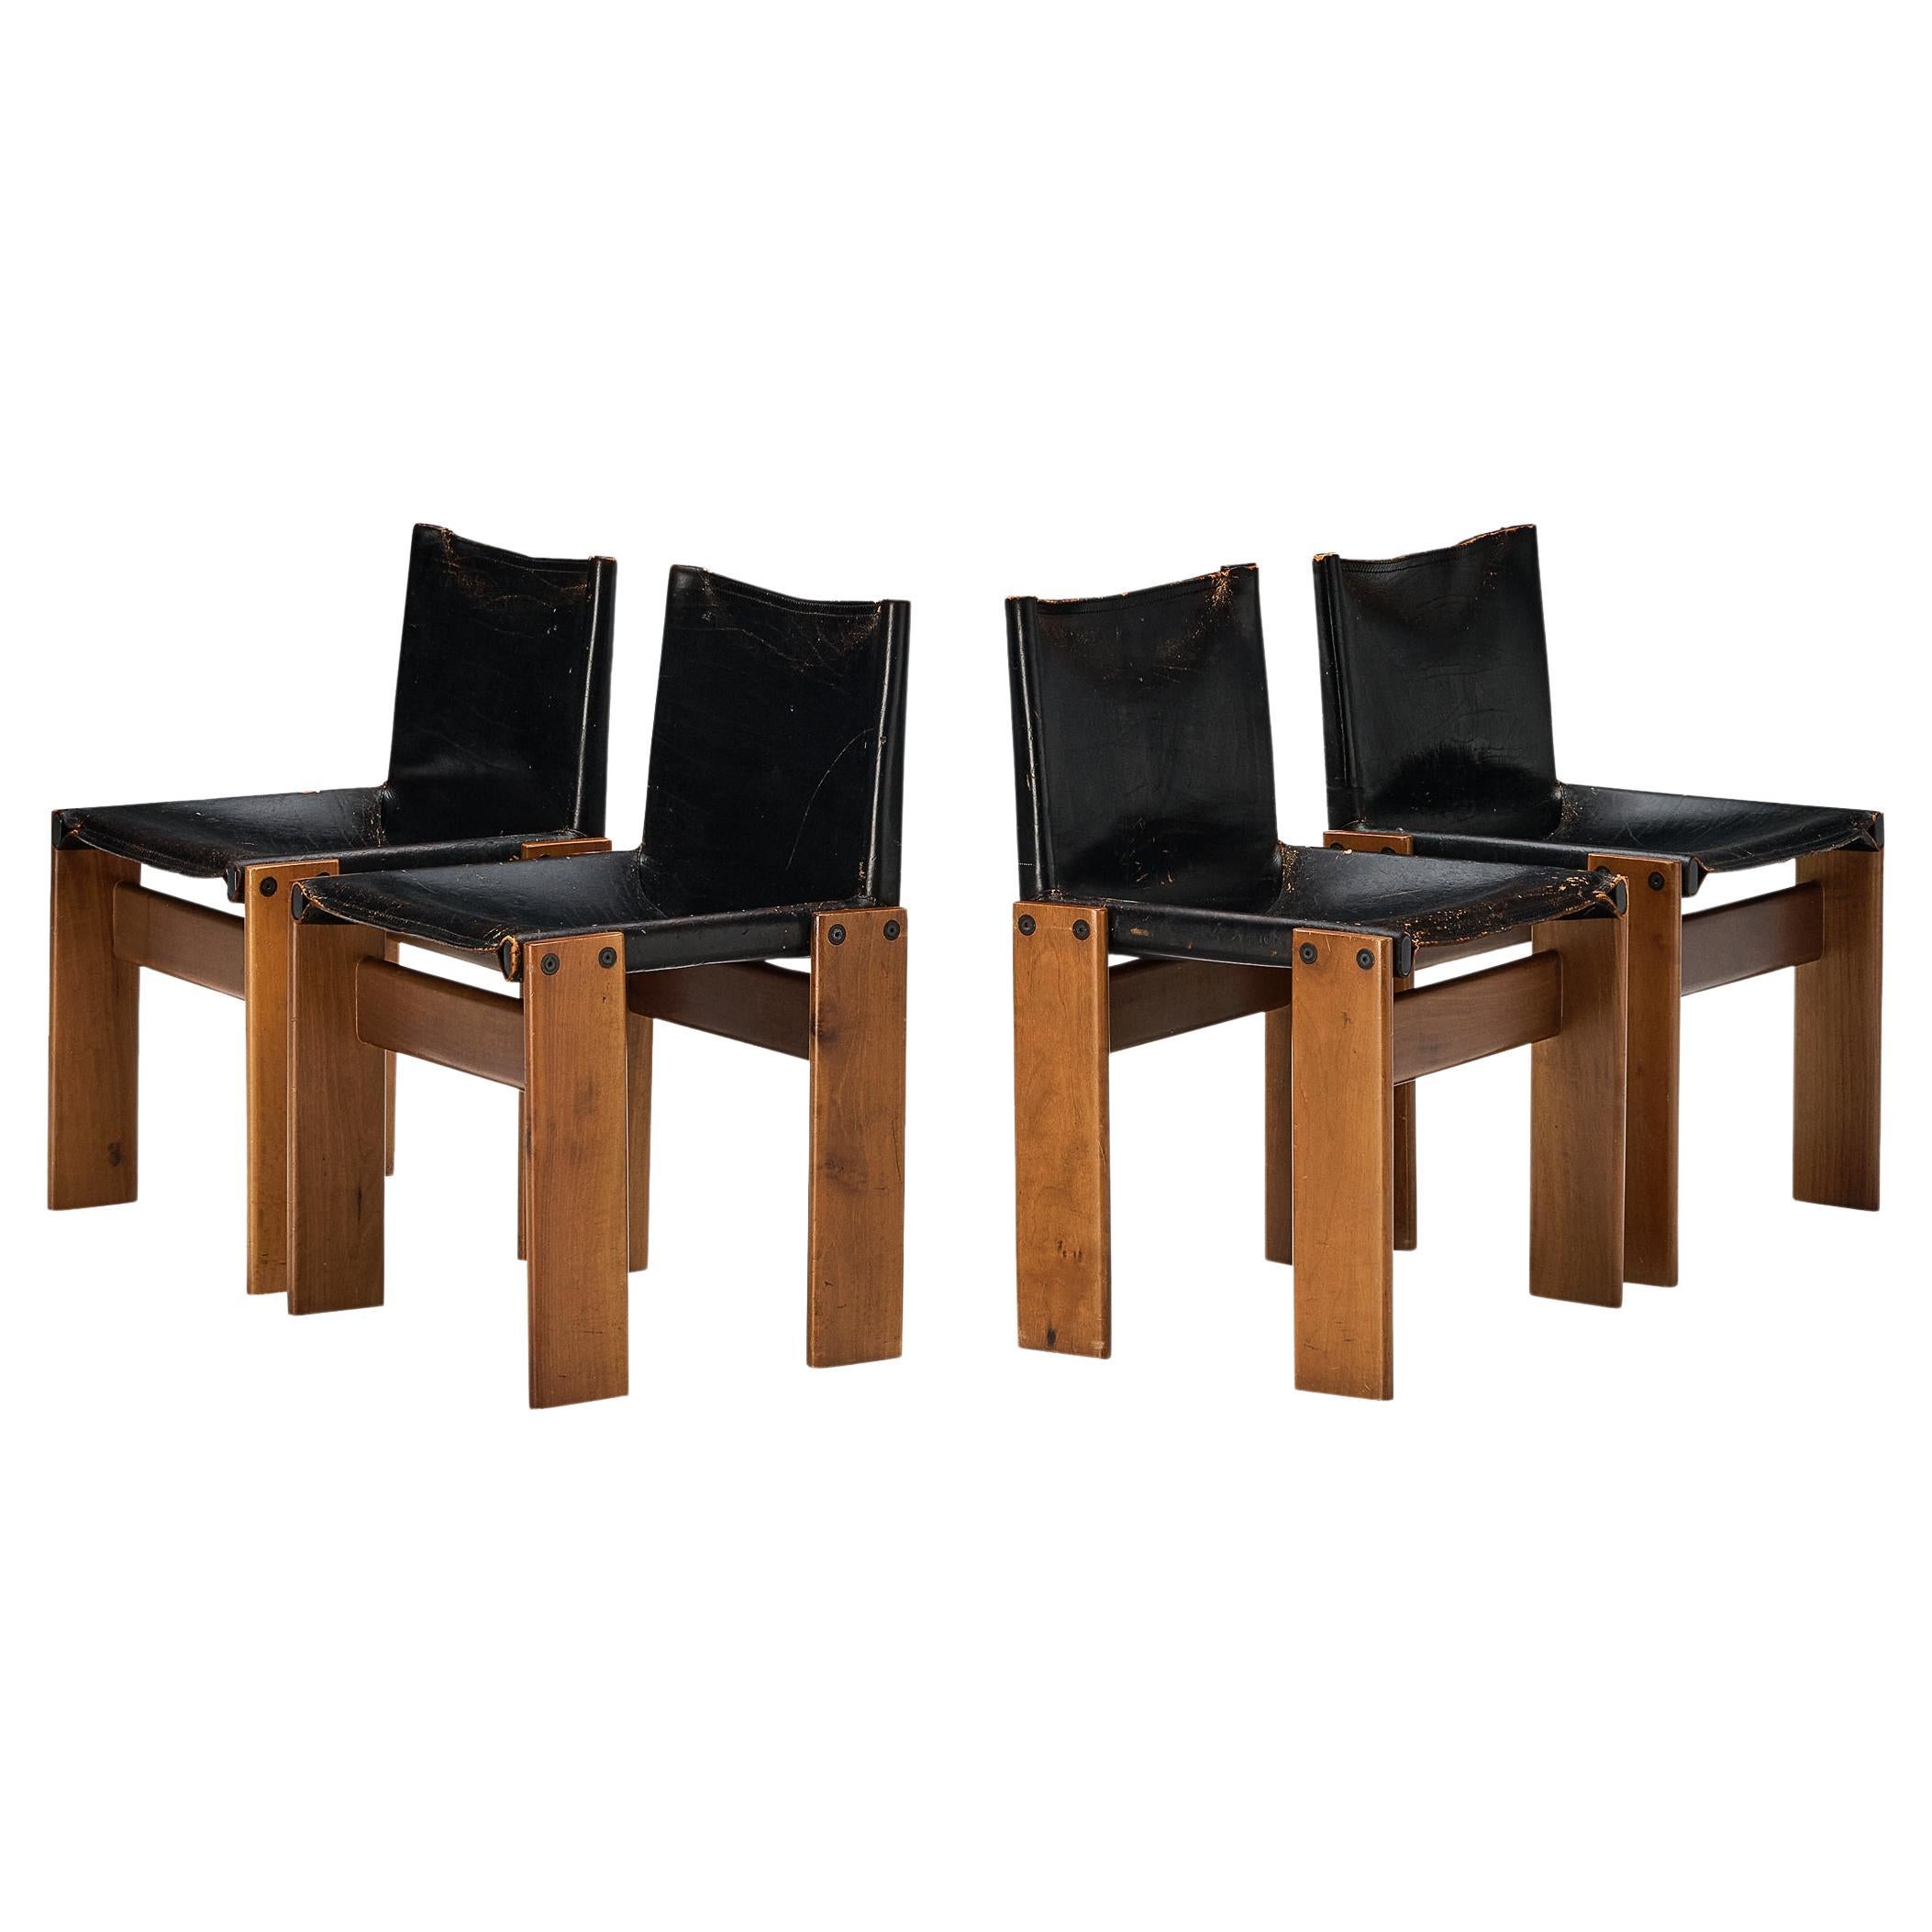 Molteni & C Dining Room Chairs